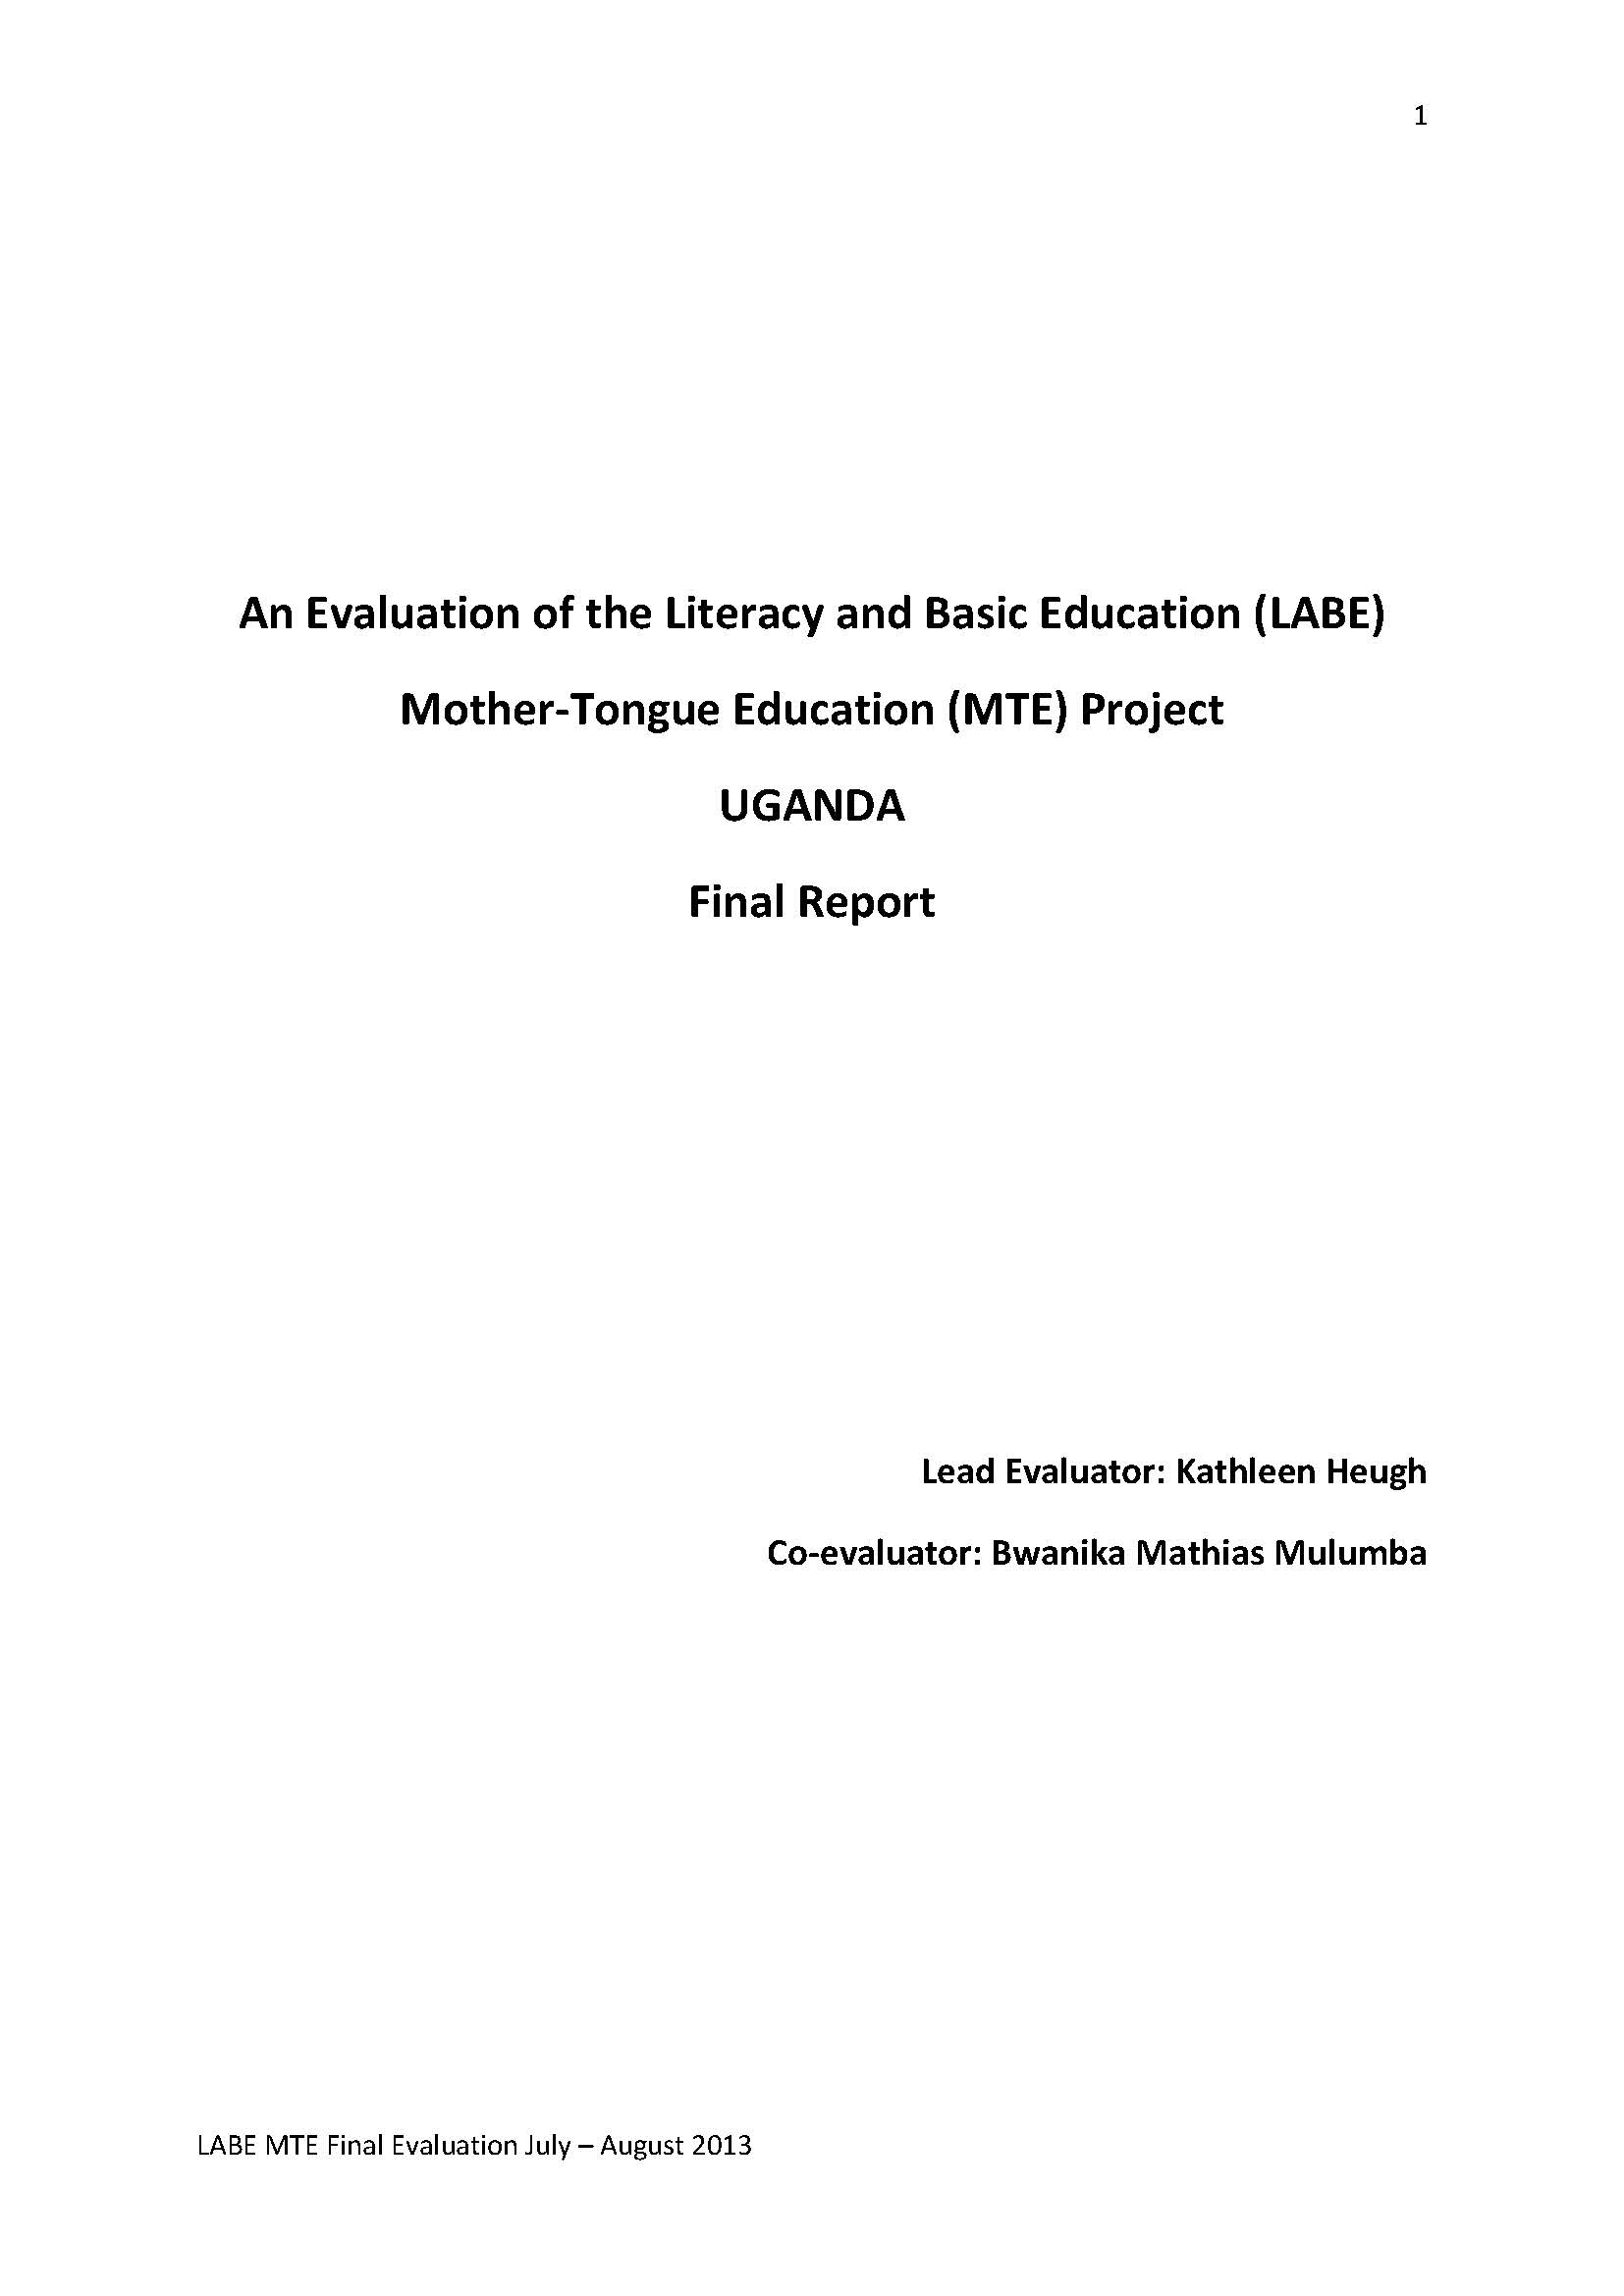 2013-LABE-Mother-Tongue-Education-Report